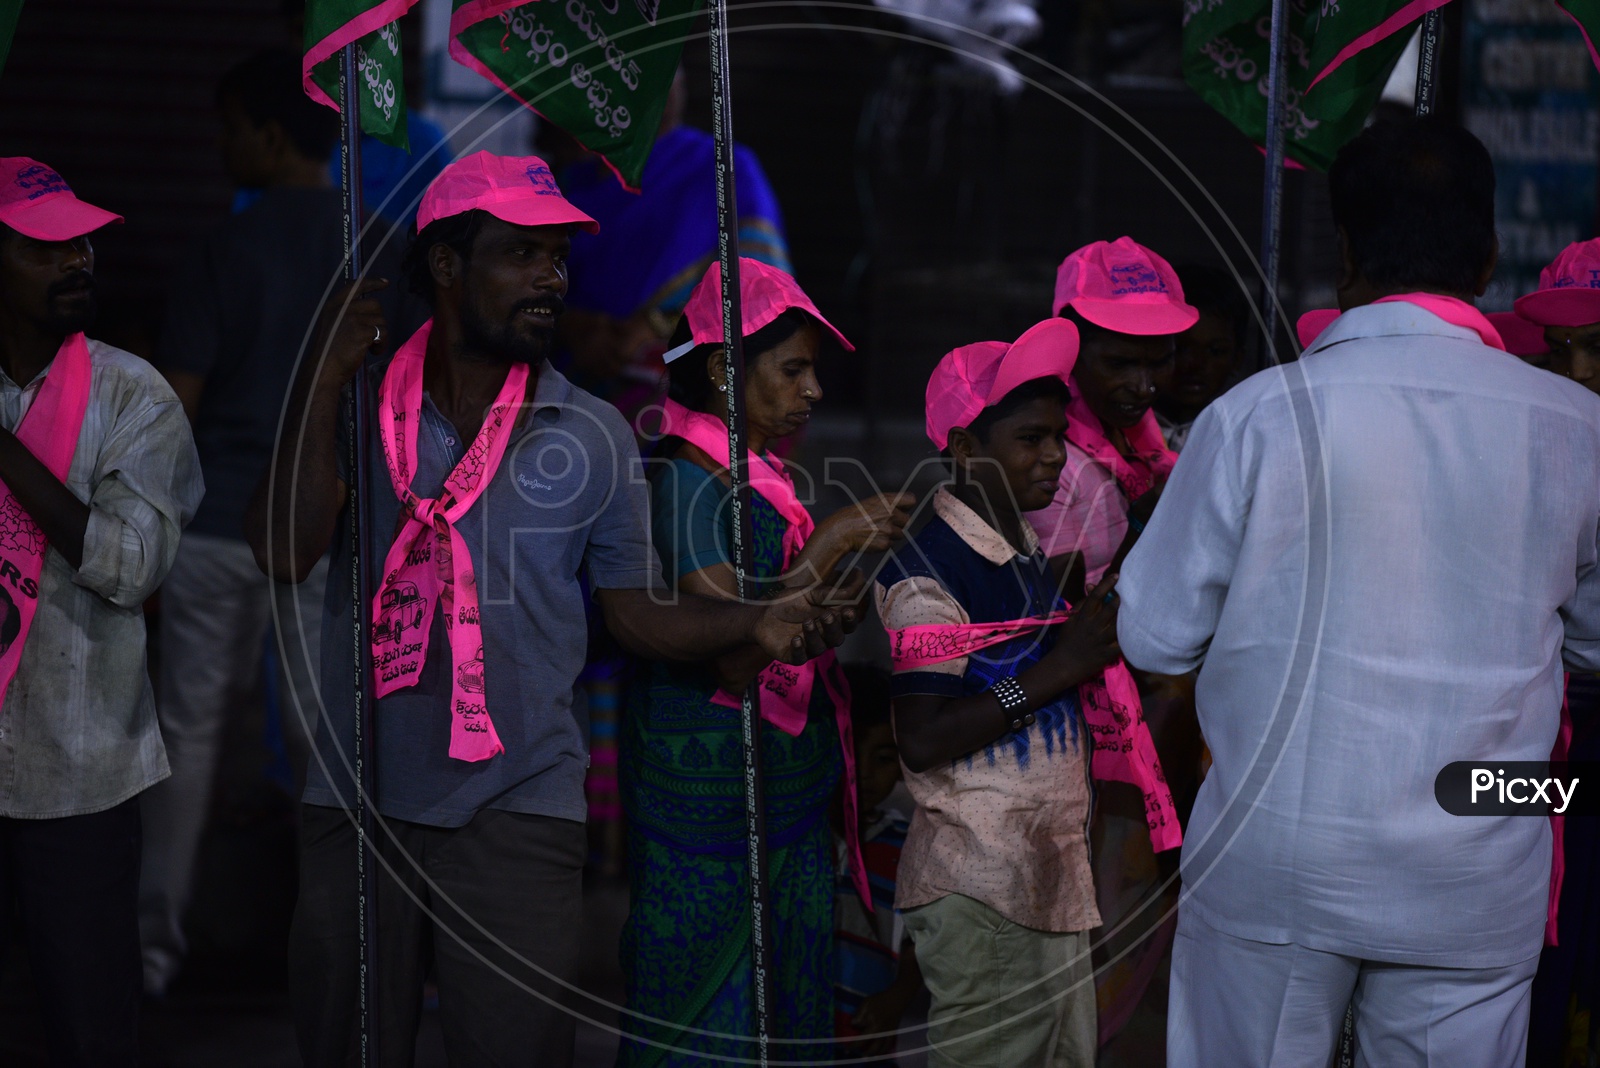 Supporters of TRS at Election Campaign for Telangana Assembly Elections 2018.